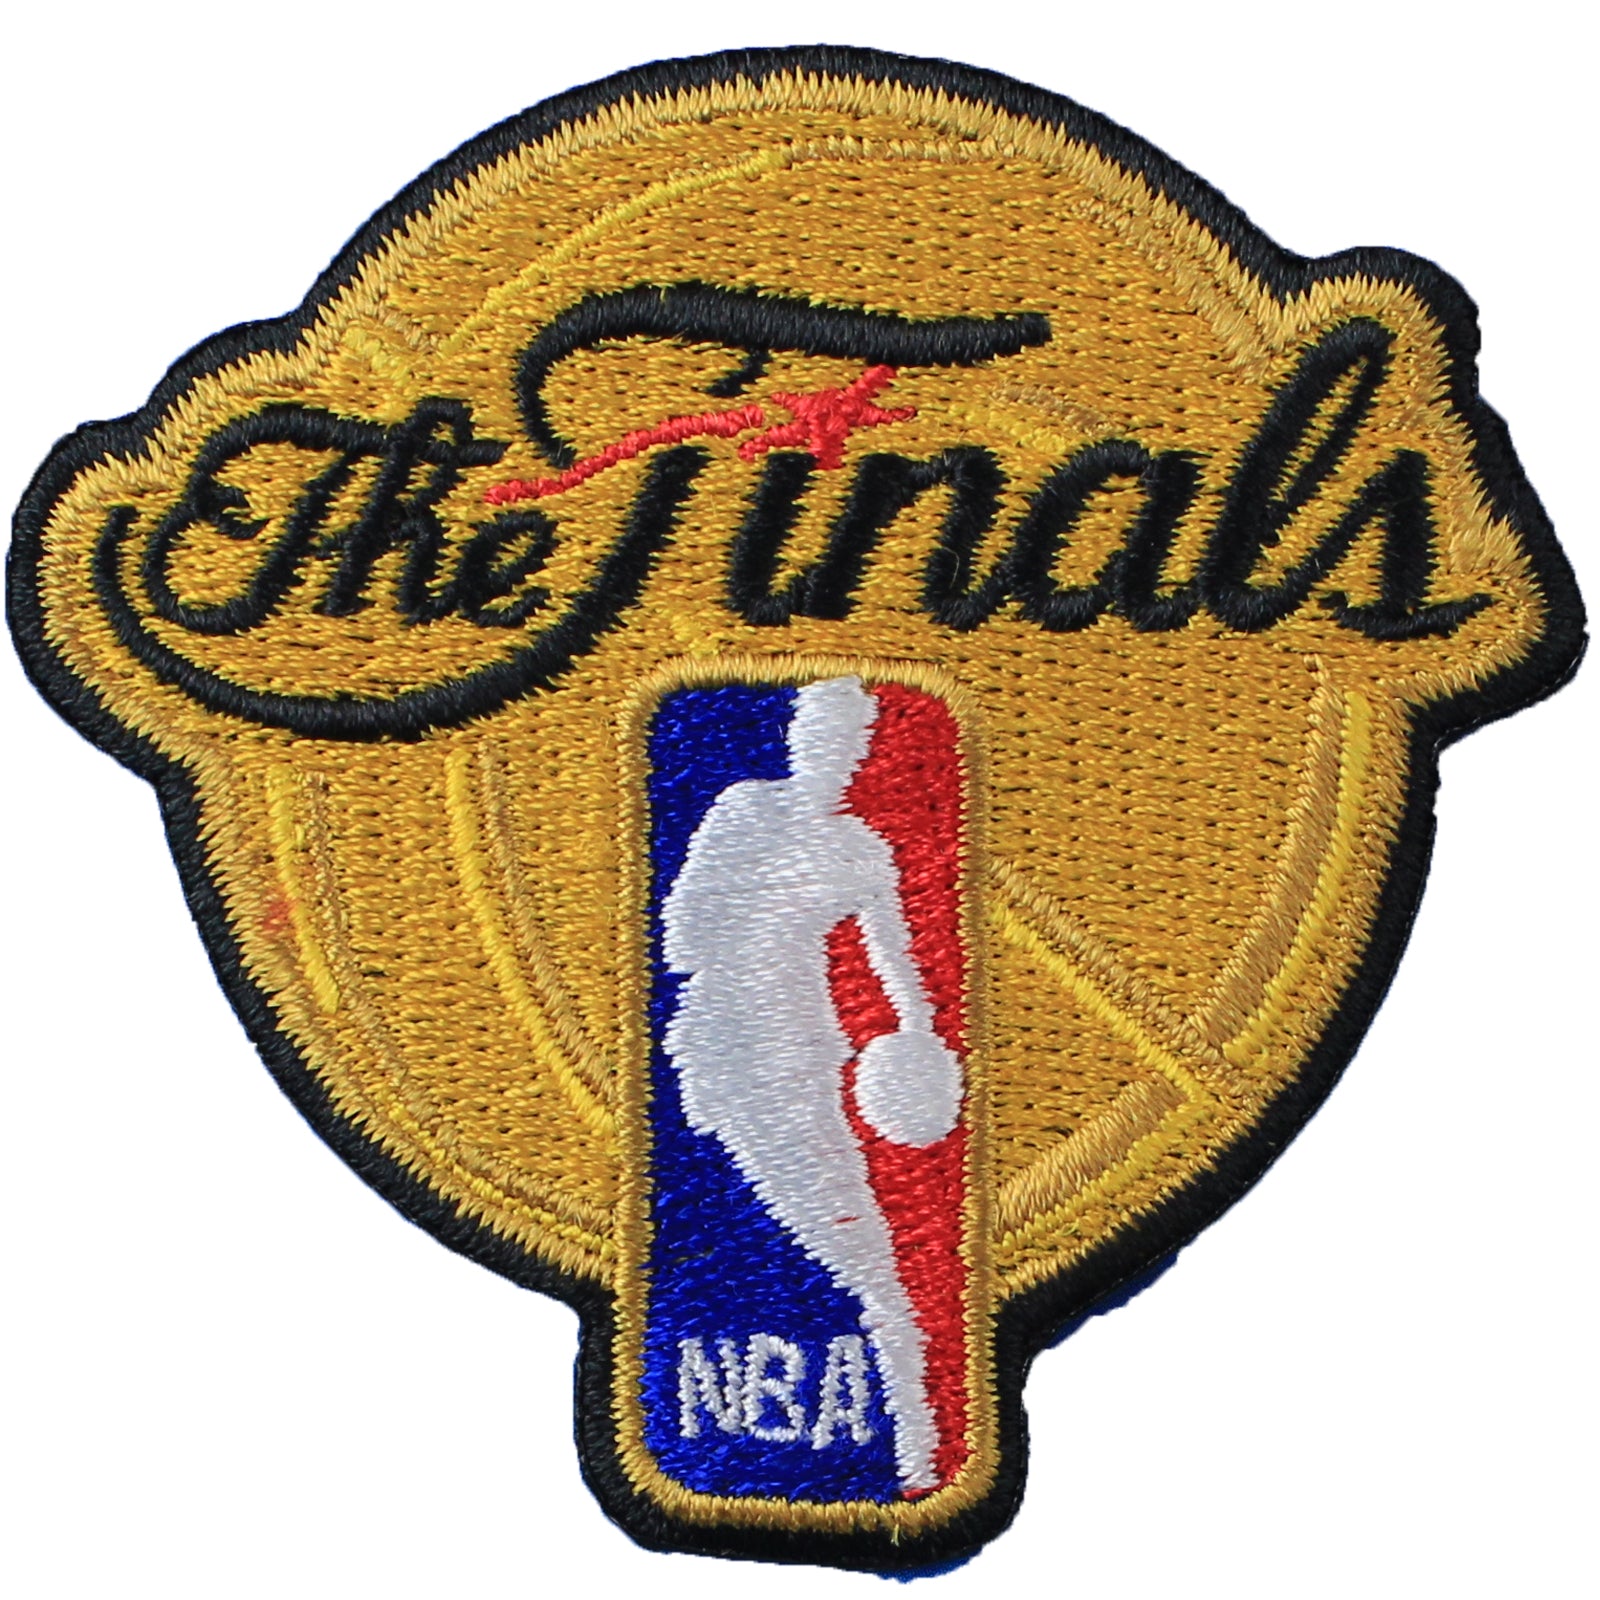 Photos: NBA jerseys to feature gold patches for title teams